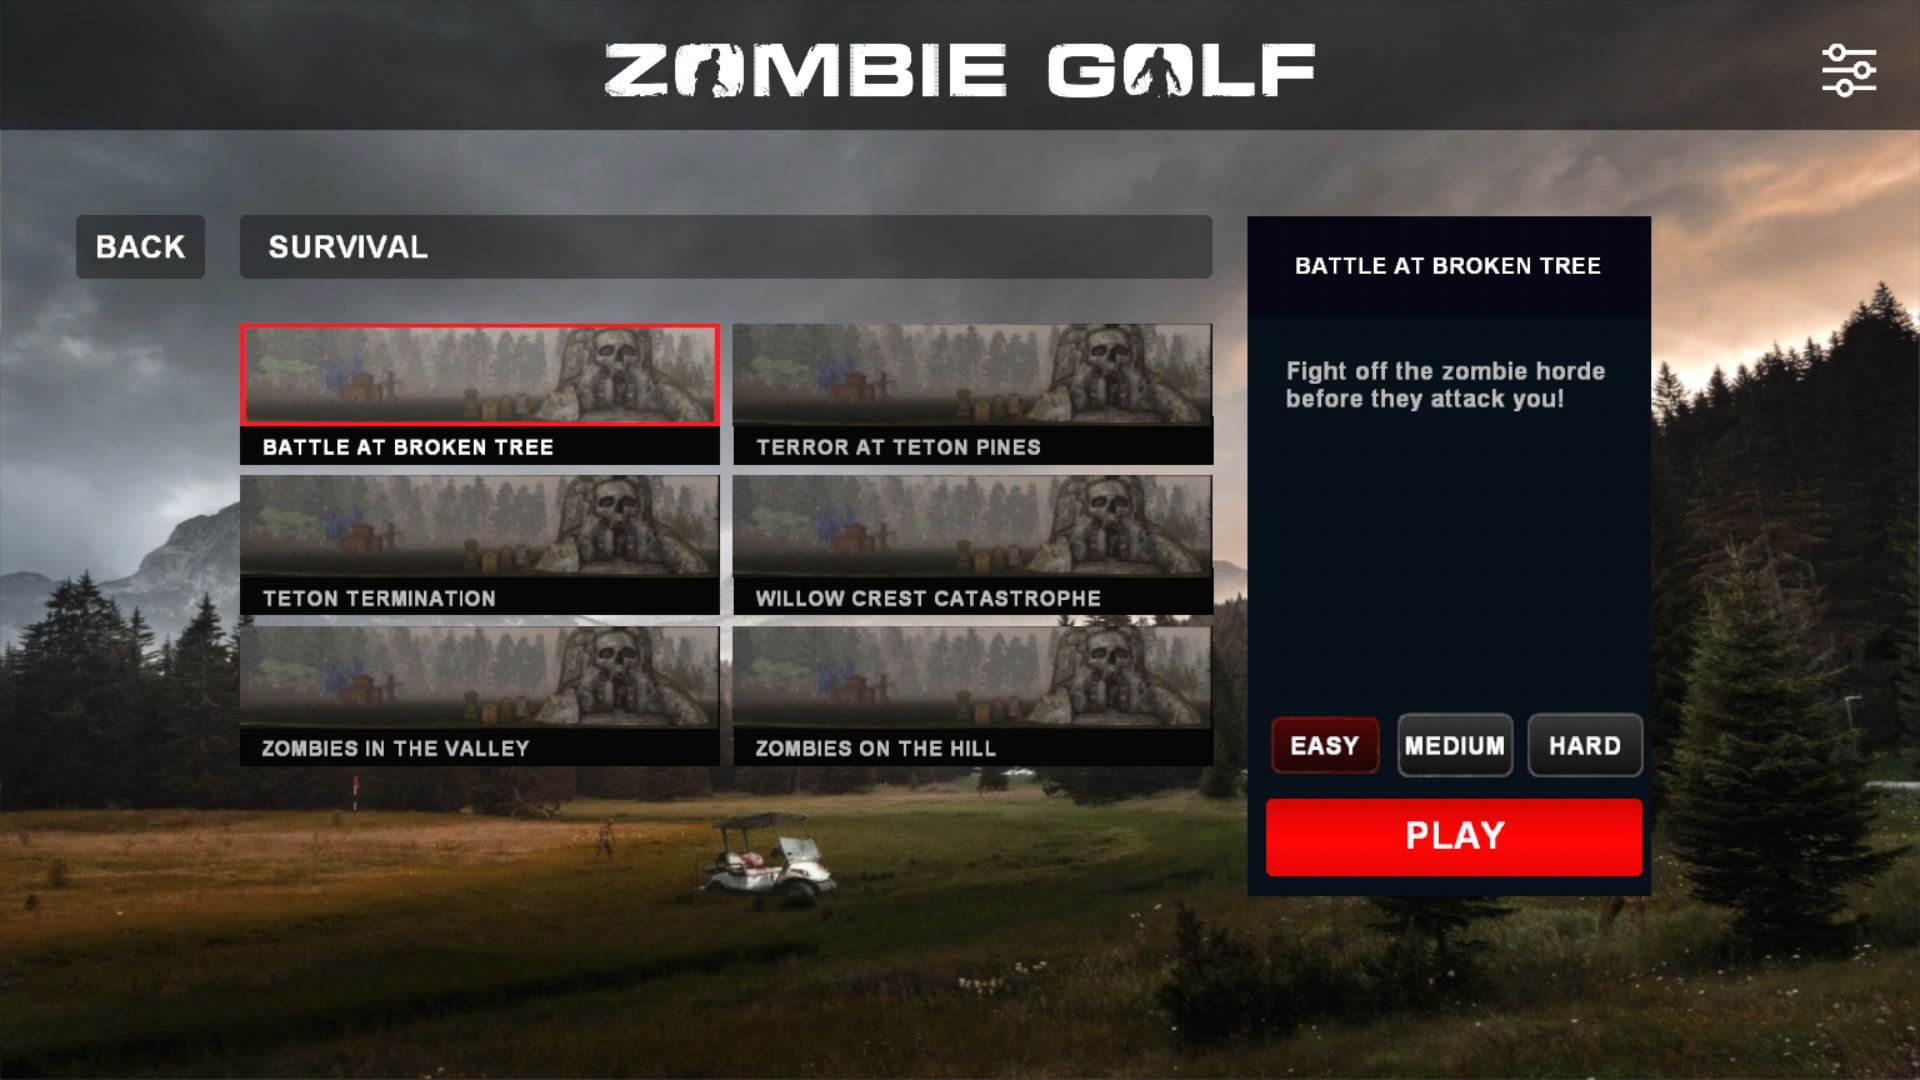 Zombie Golf Survival Difficulty